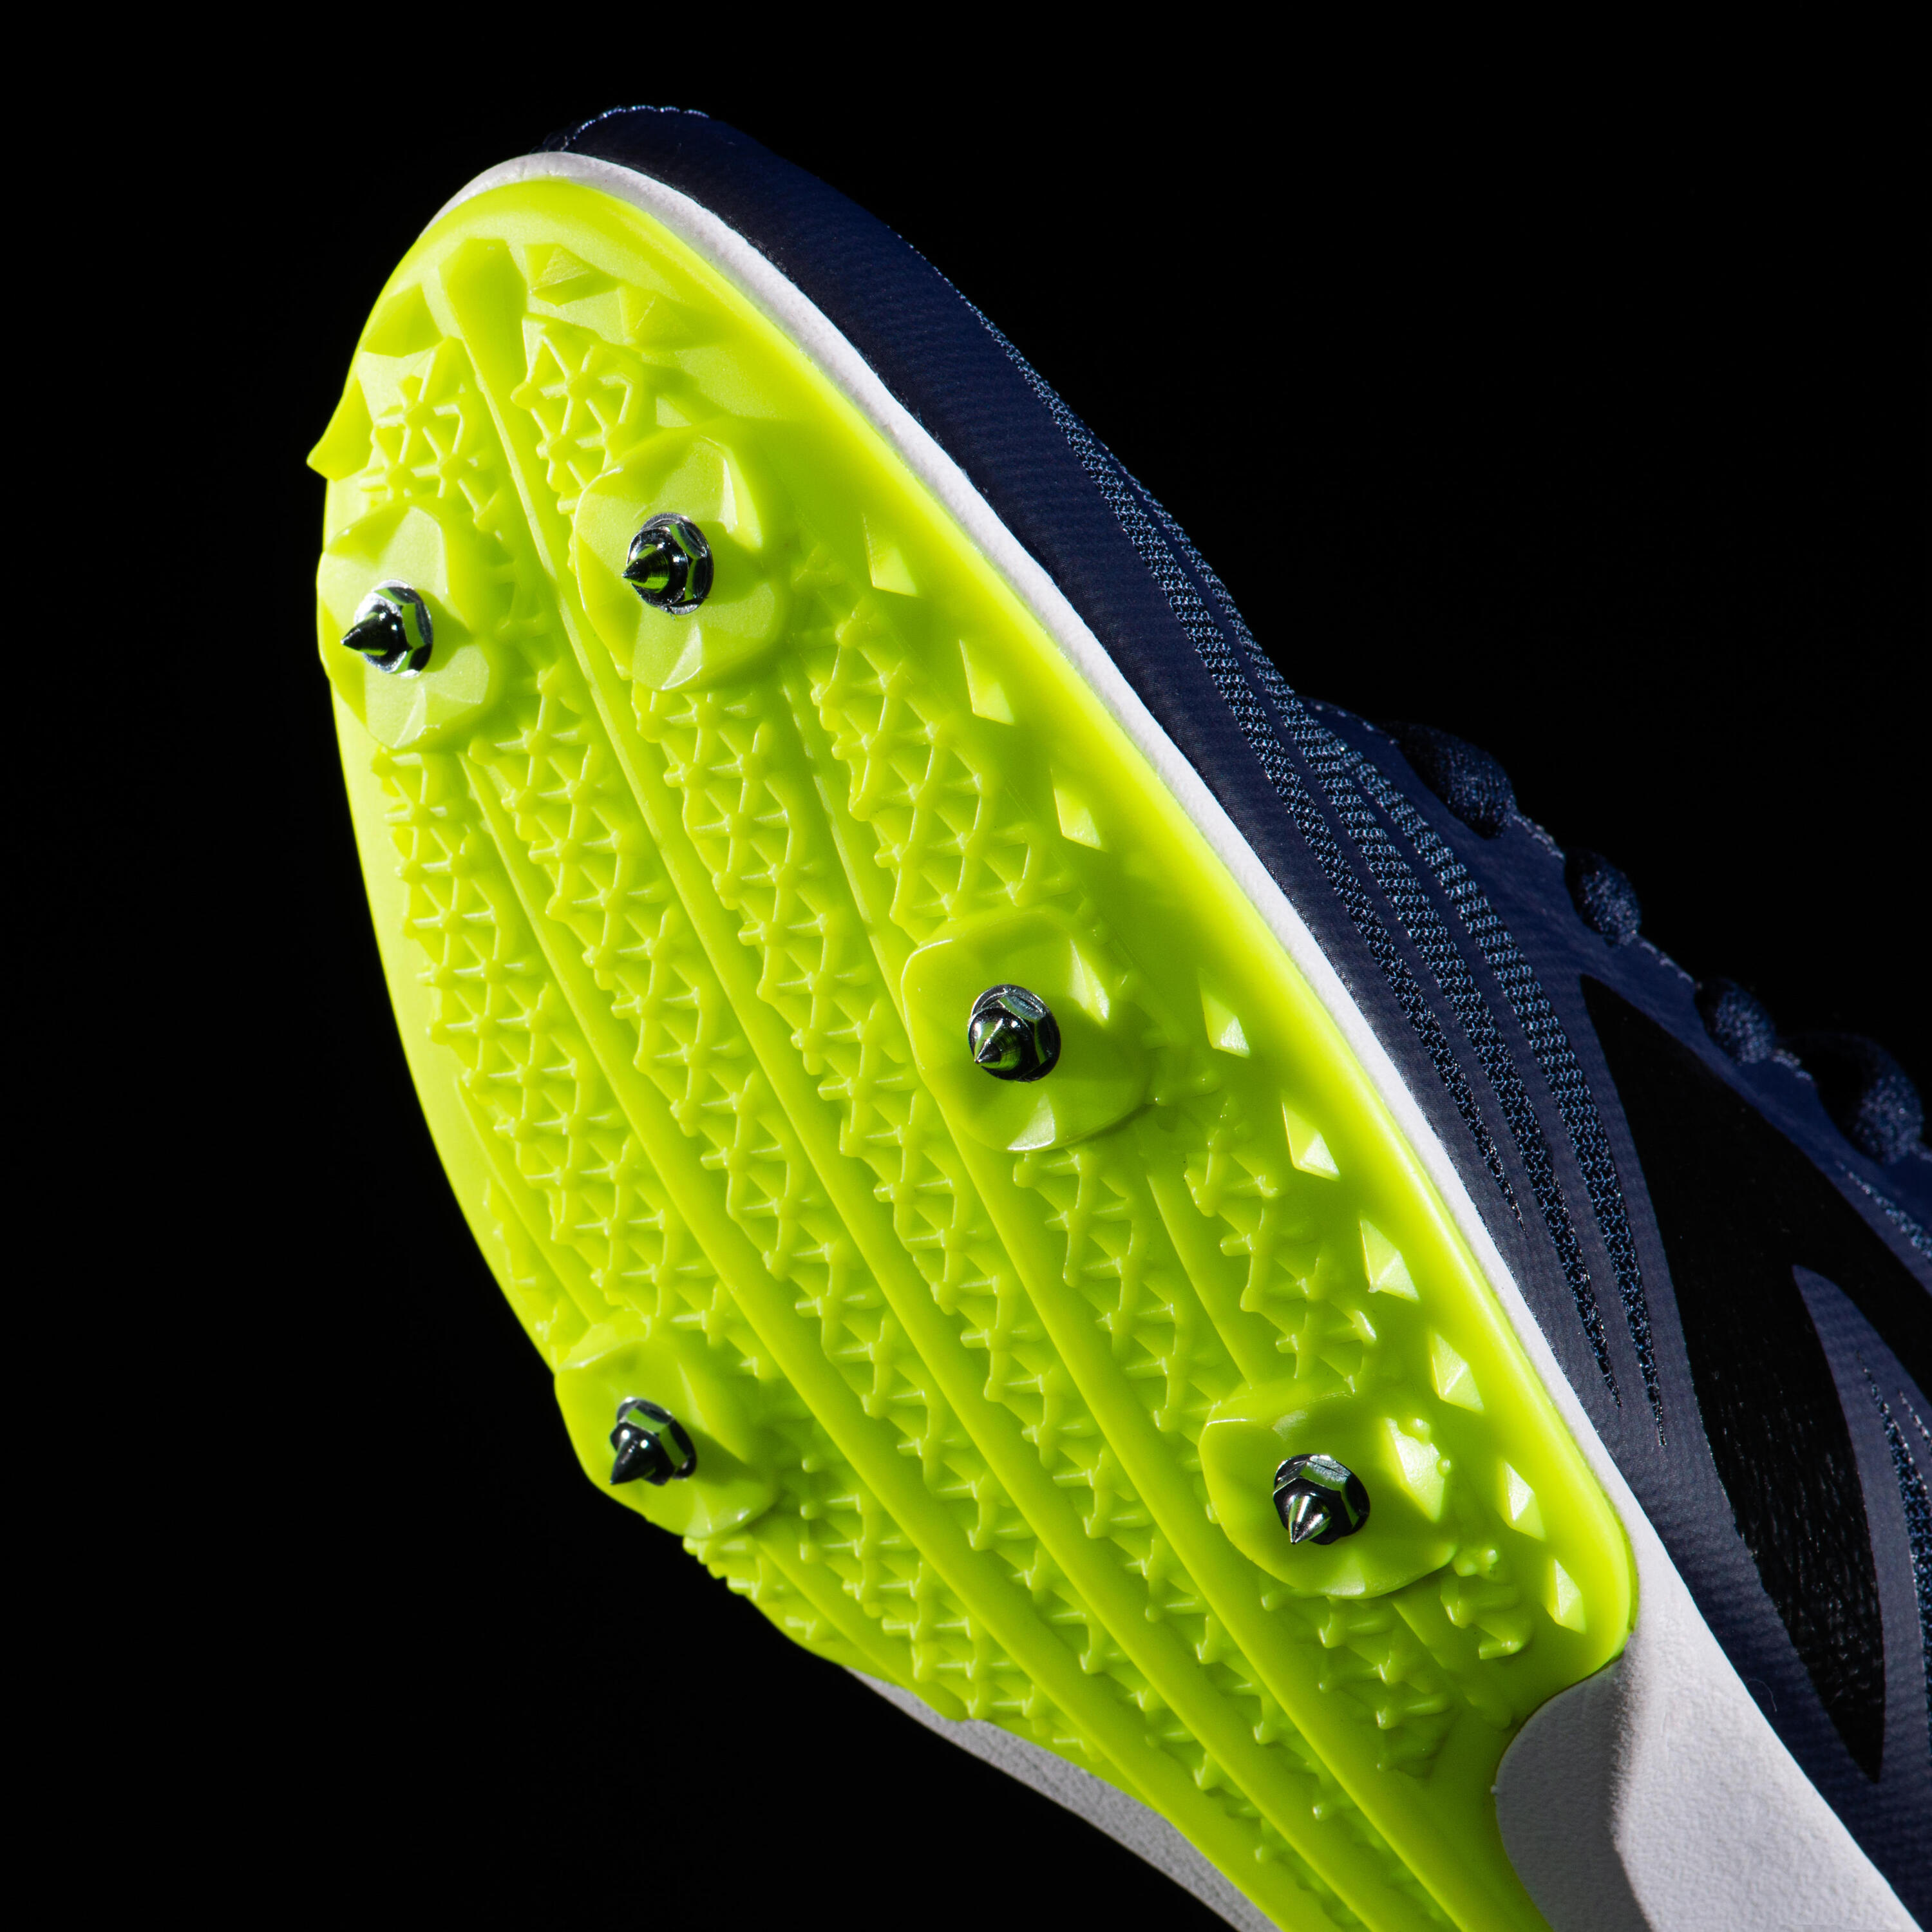 AT MID MIDDLE-DISTANCE ATHLETICS SHOES WITH SPIKES - BLUE/BLACK/YELLOW 2/5